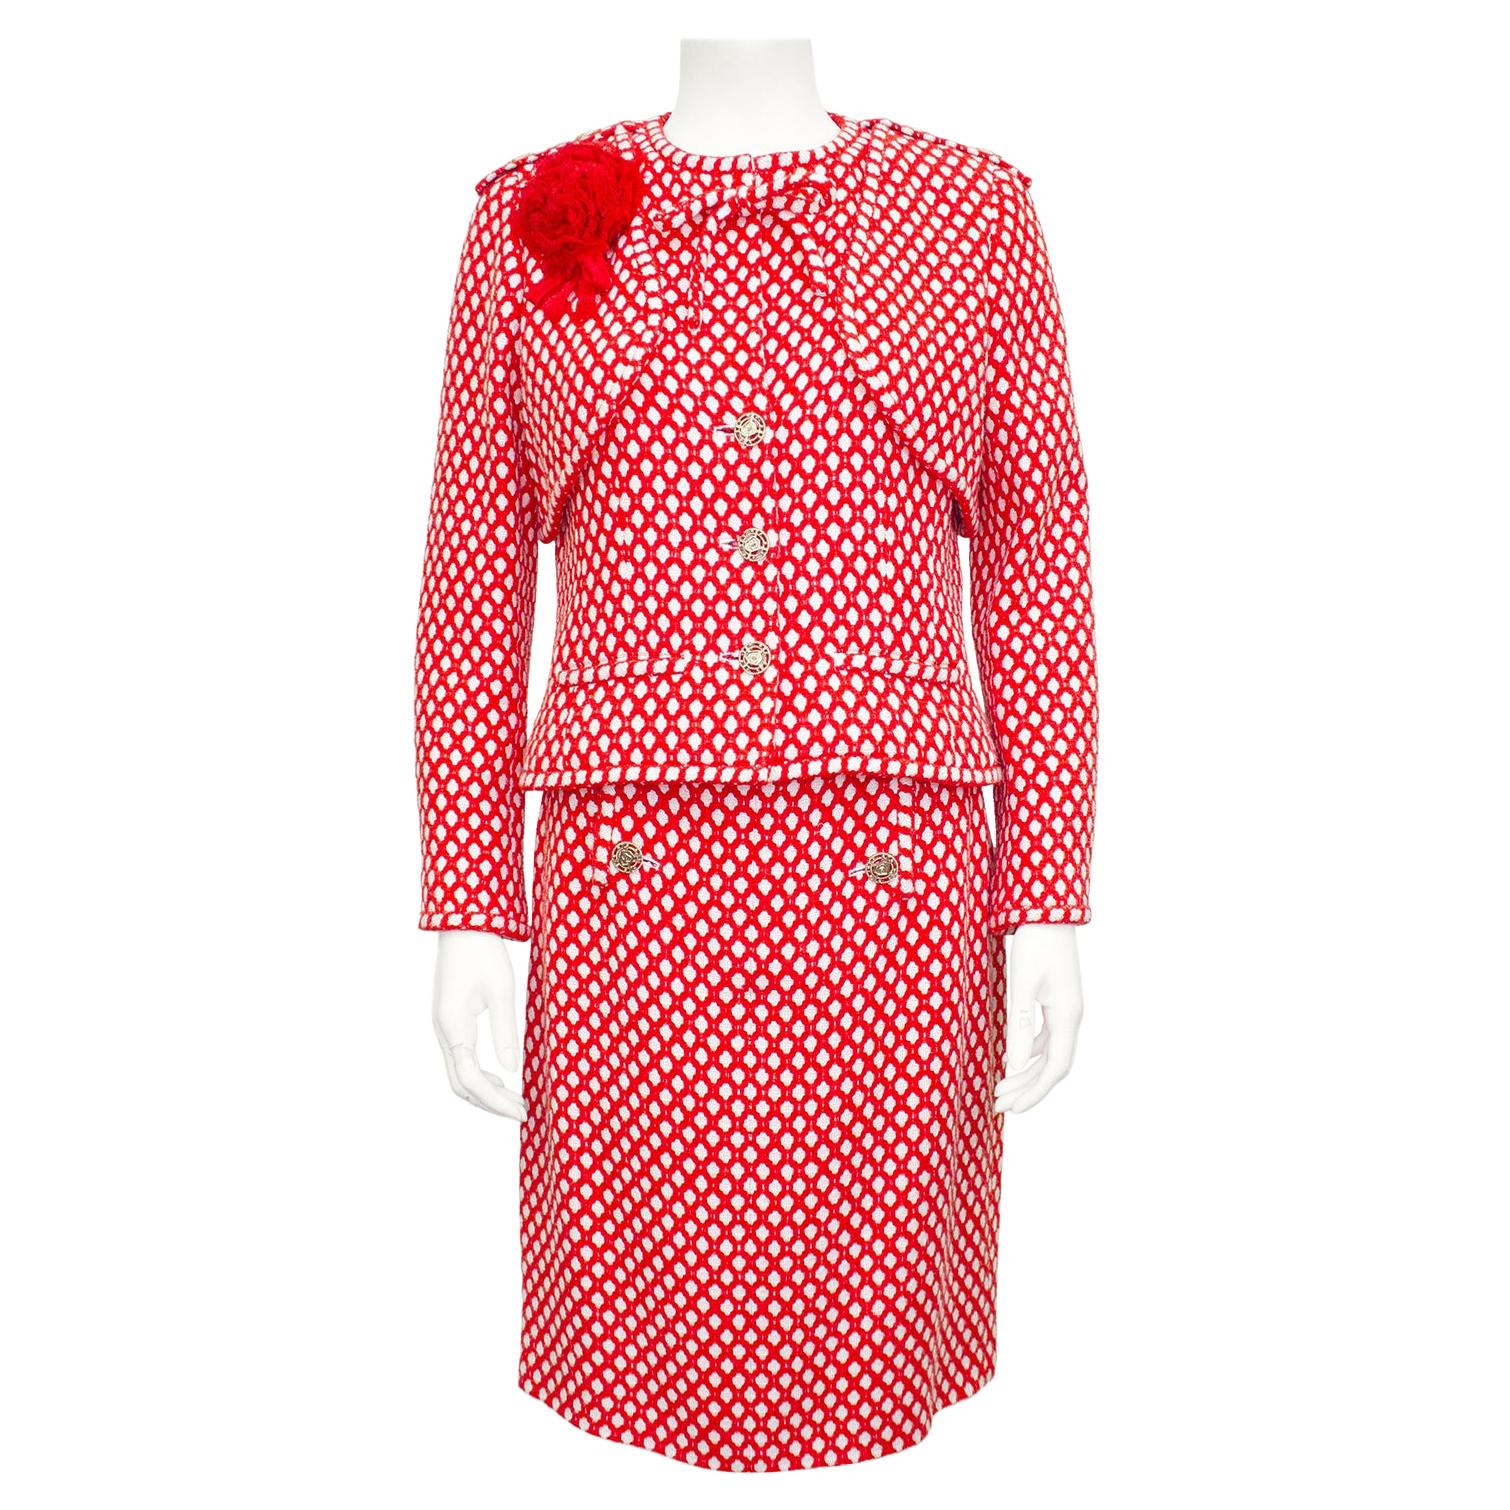 Spring 2008 Chanel Red and White Tweed Skirt Suit 